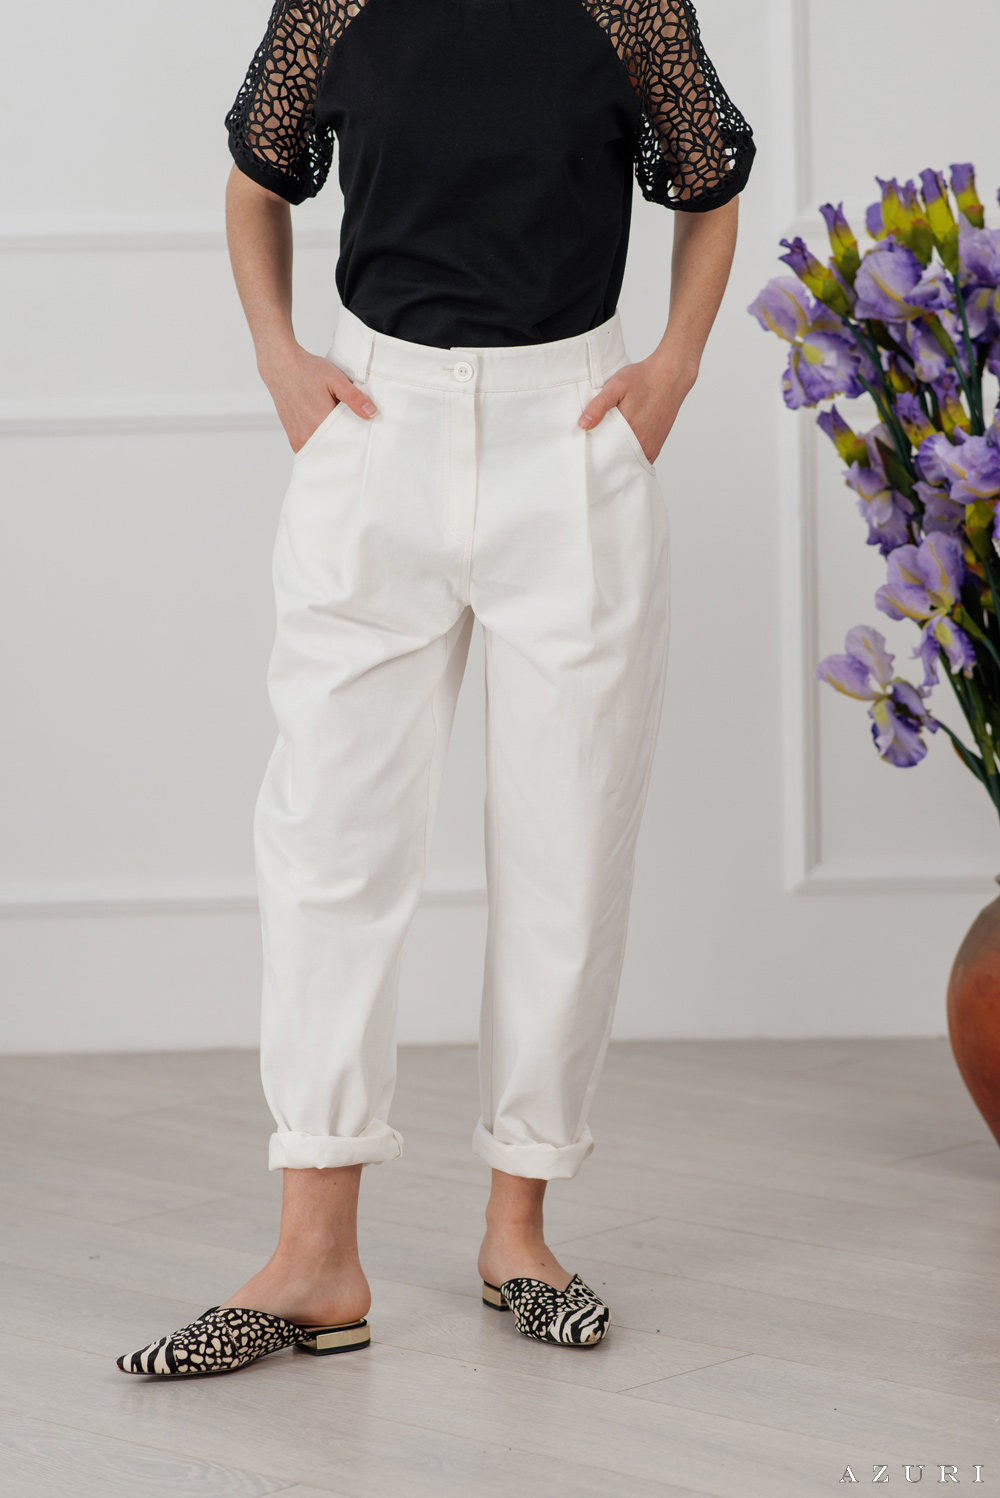 White balloon fit jeans